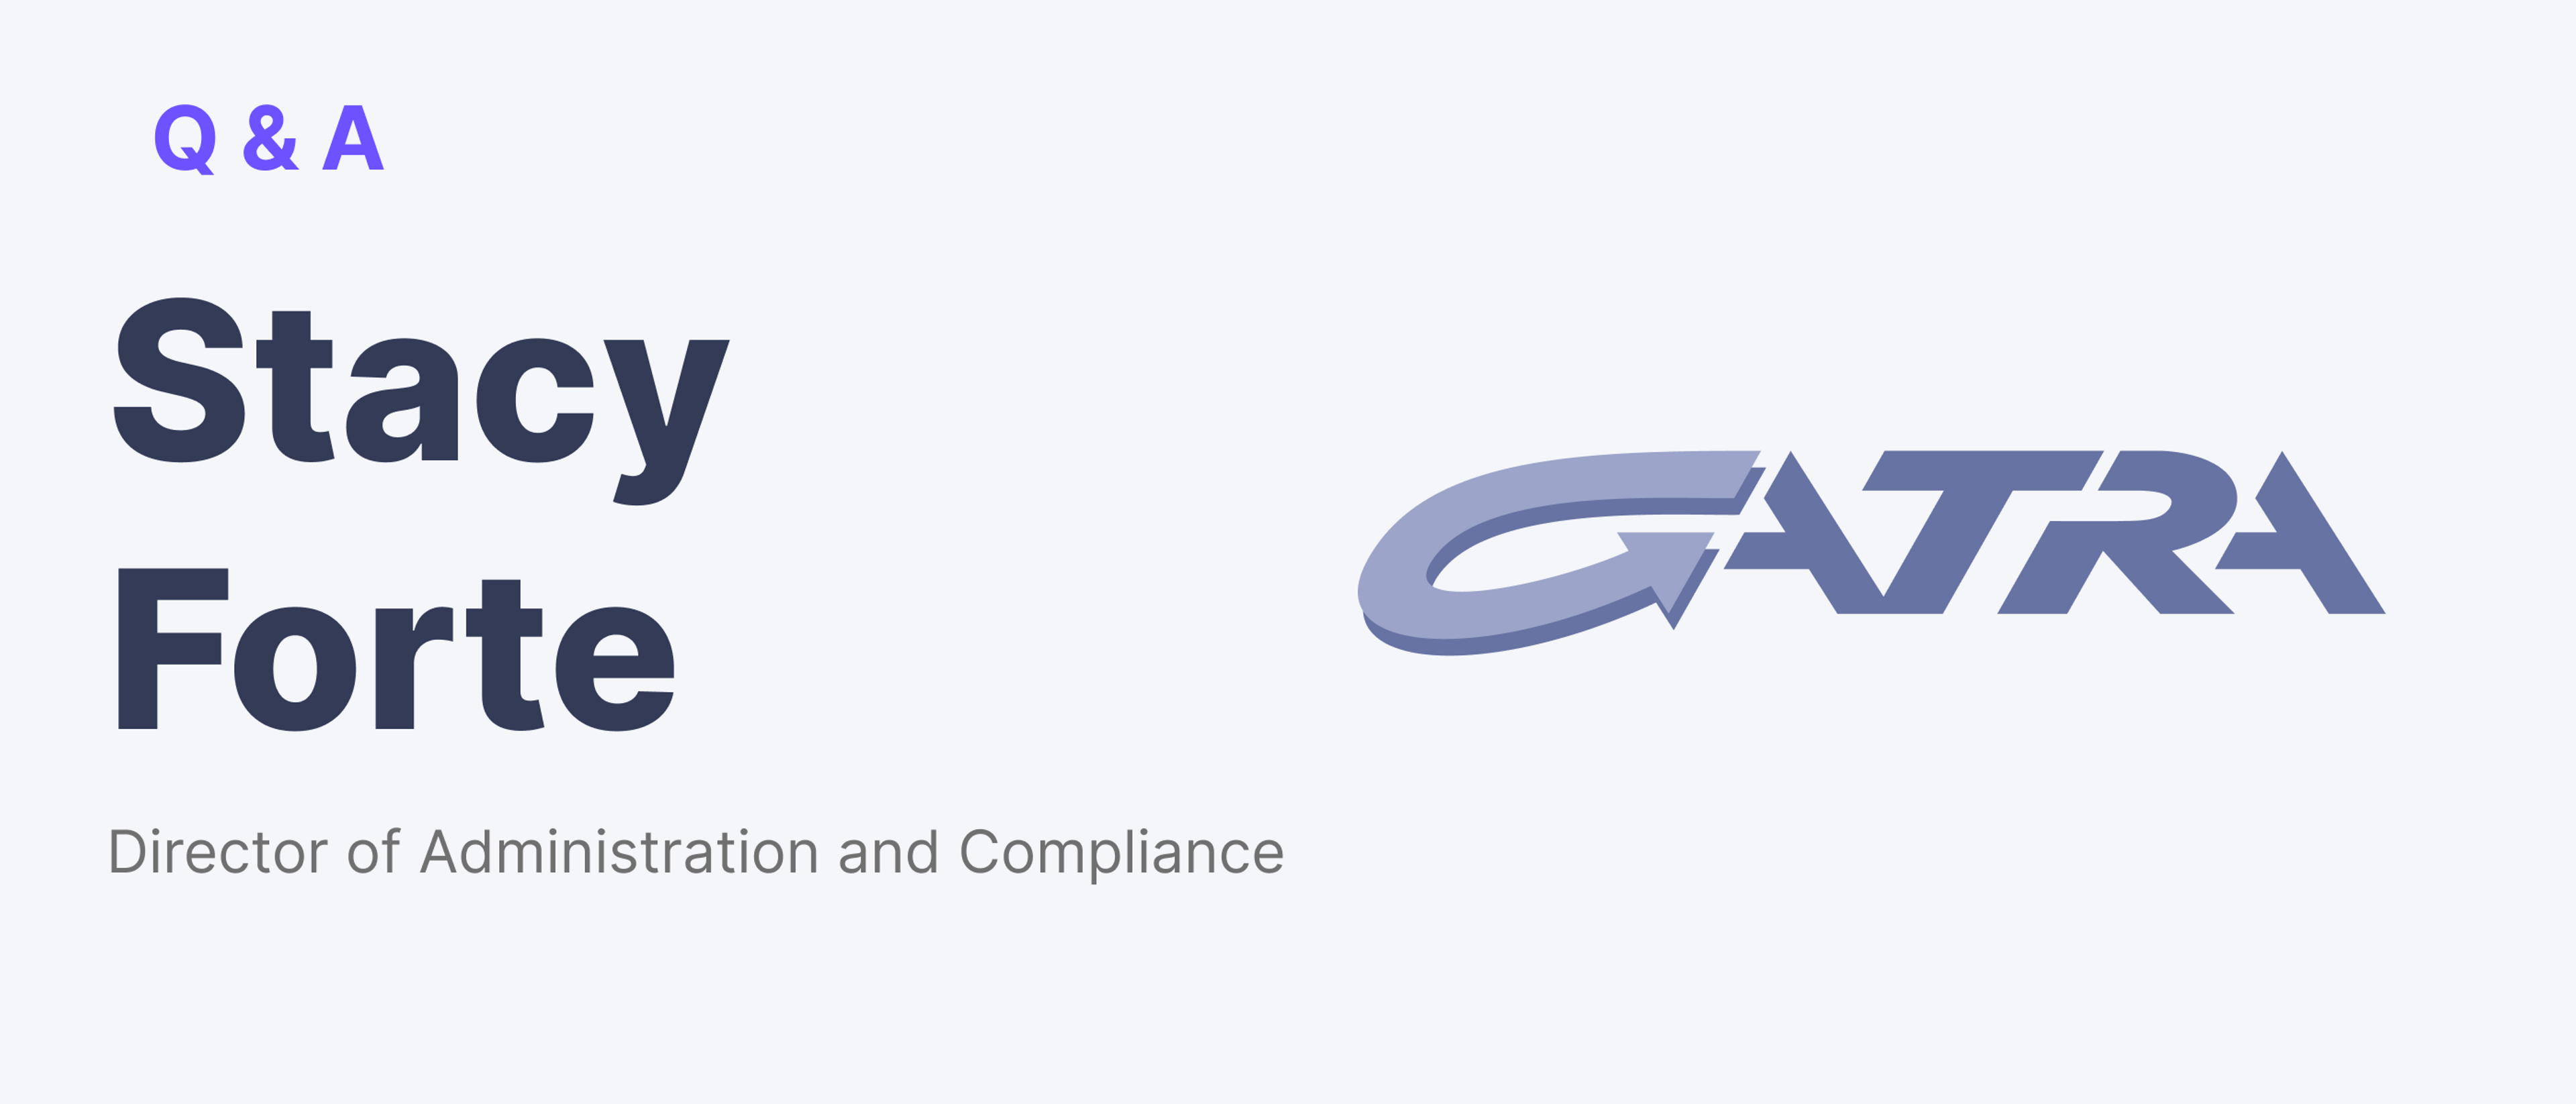 Interview with Stacy Forte, Director of Administration and Compliance, GATRA